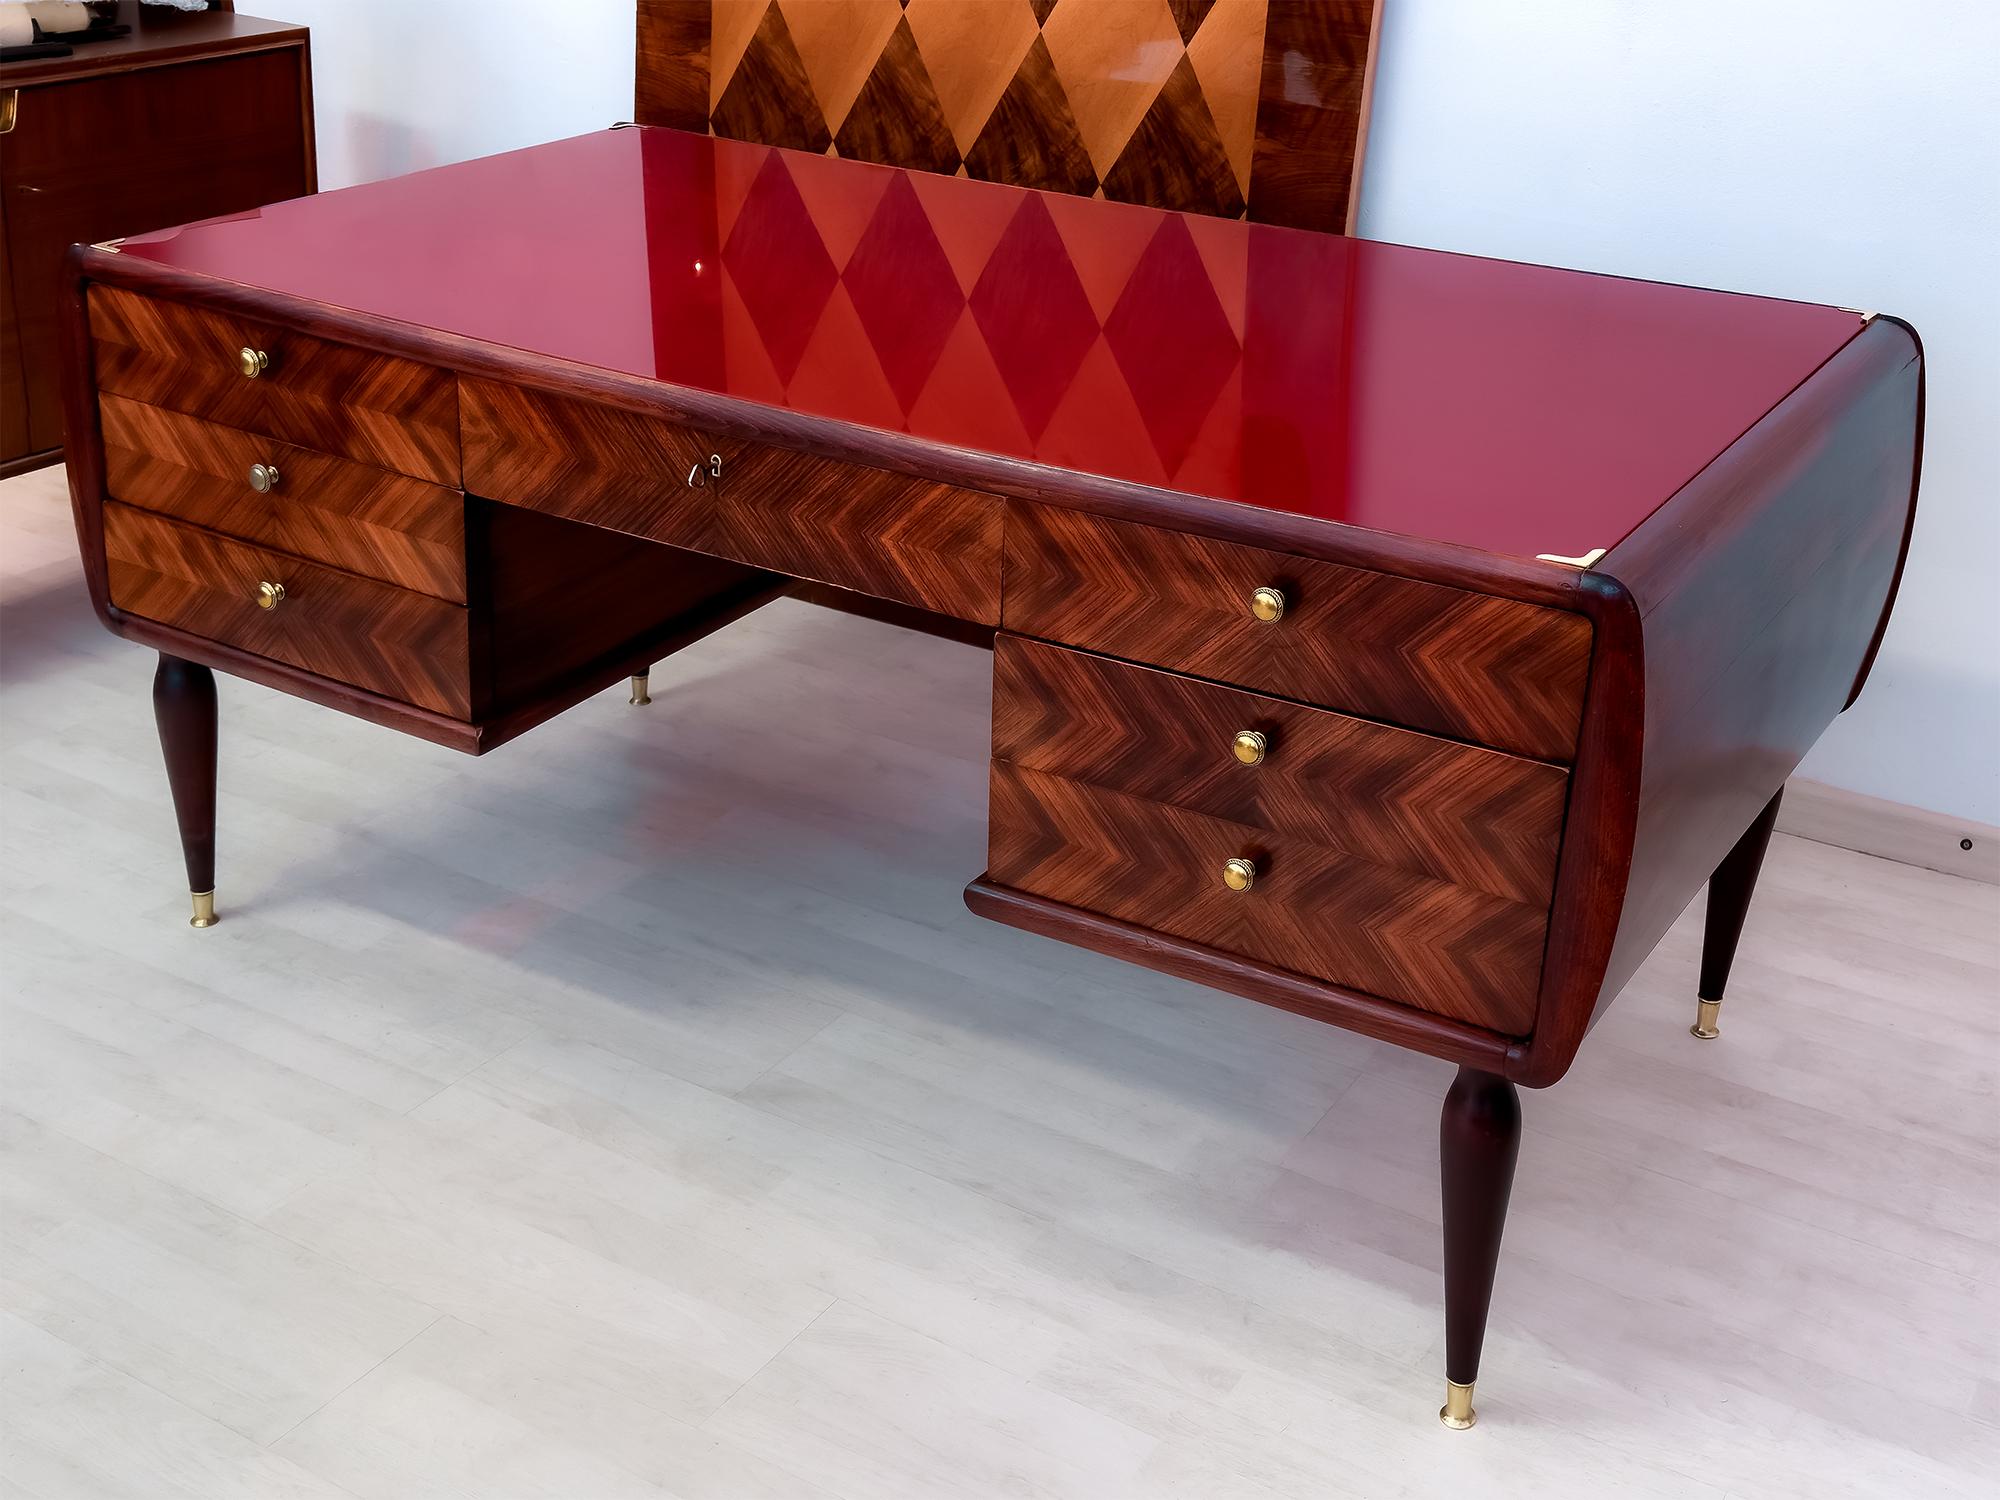 Elegant Italian Desk of the 50s designed in the manner of Paolo Buffa.
It has a soft design given by its rounded sides and tapered legs that are finished with brass feet, and in addition it is distinguished by its scarlet red glass top desk that